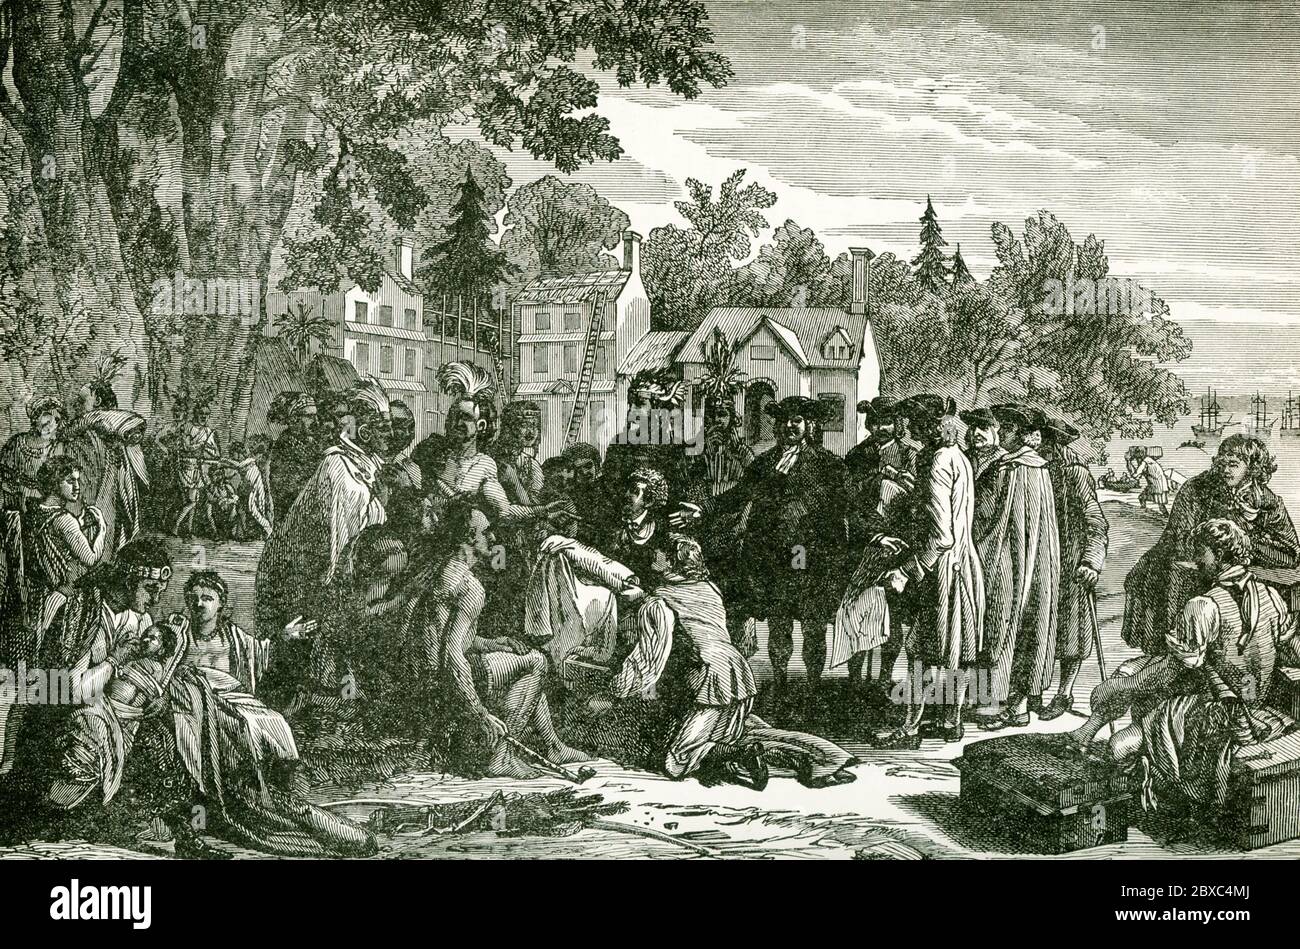 This illustration shows William Penn’s treaty with Indians. William Penn (1644-1718) founded the Province of Pennsylvania, the British North American colony that became the U.S. state of Pennsylvania. Penn made a treaty with the Indians (seen here) at Shackamaxon (near Kensington in Philadelphia) under an elm tree. Penn chose to acquire lands for his colony through business rather than conquest. He paid the Indians 1200 pounds for their land under the treaty, an amount considered fair. Stock Photo